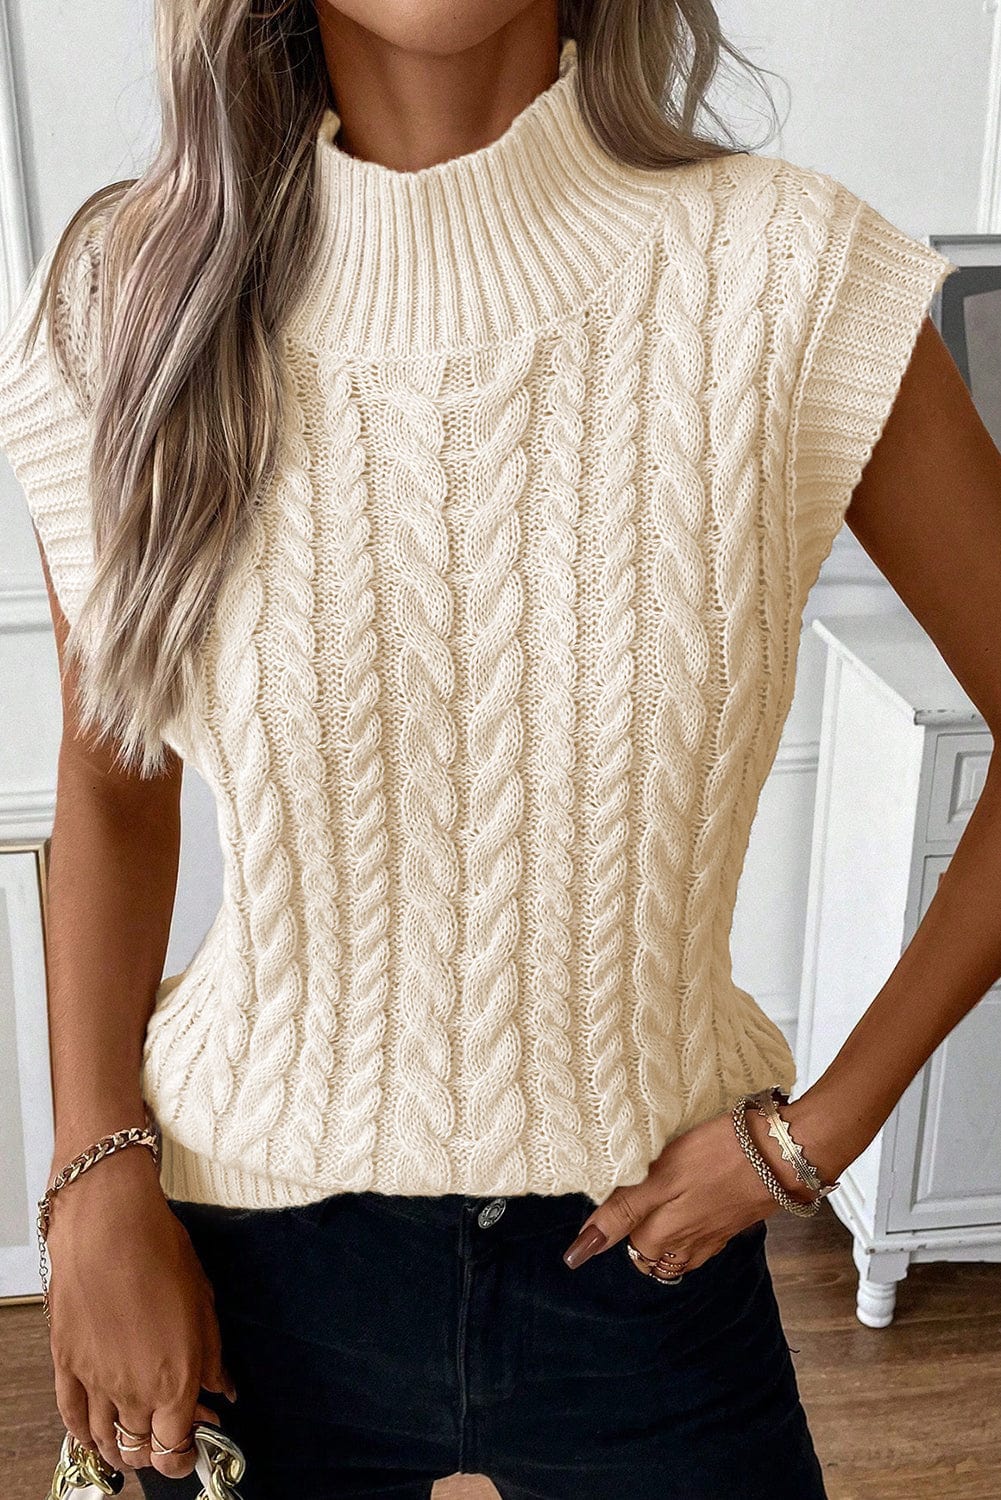 The802Gypsy  Sweaters & Cardigans/Sweater Vests Oatmeal / S / 100%Acrylic ❤️TRAVELING GYPSY-Cable Knit High Neck Sweater